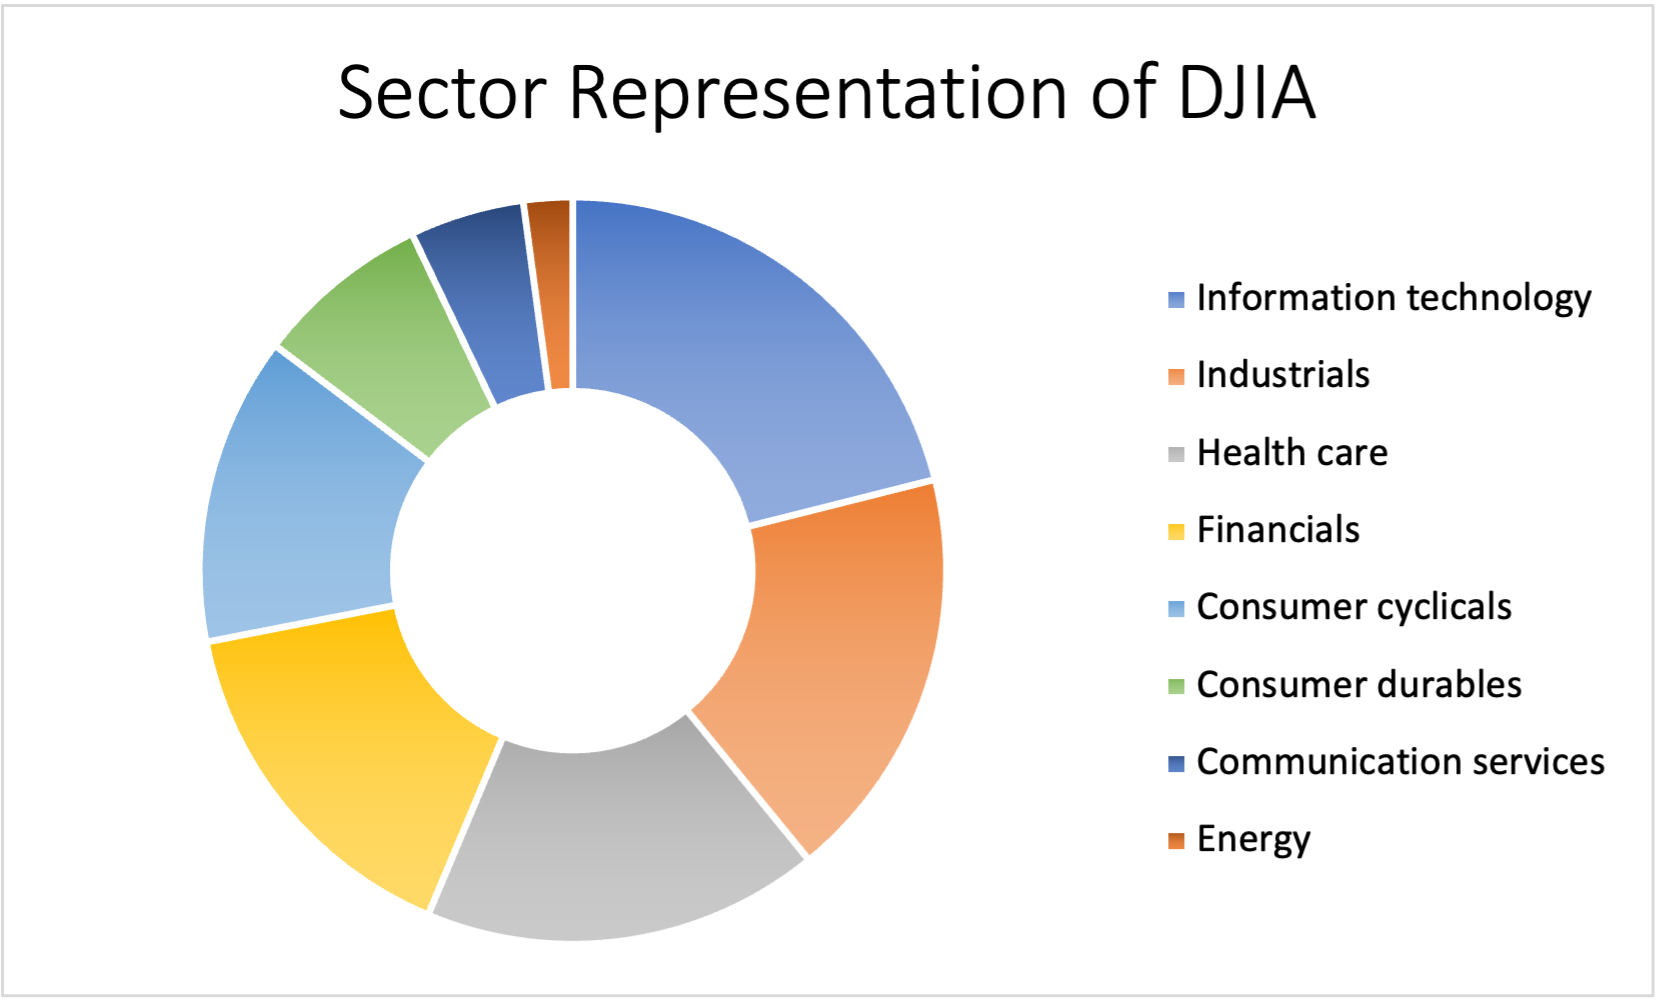 Sector representation in the DJIA index